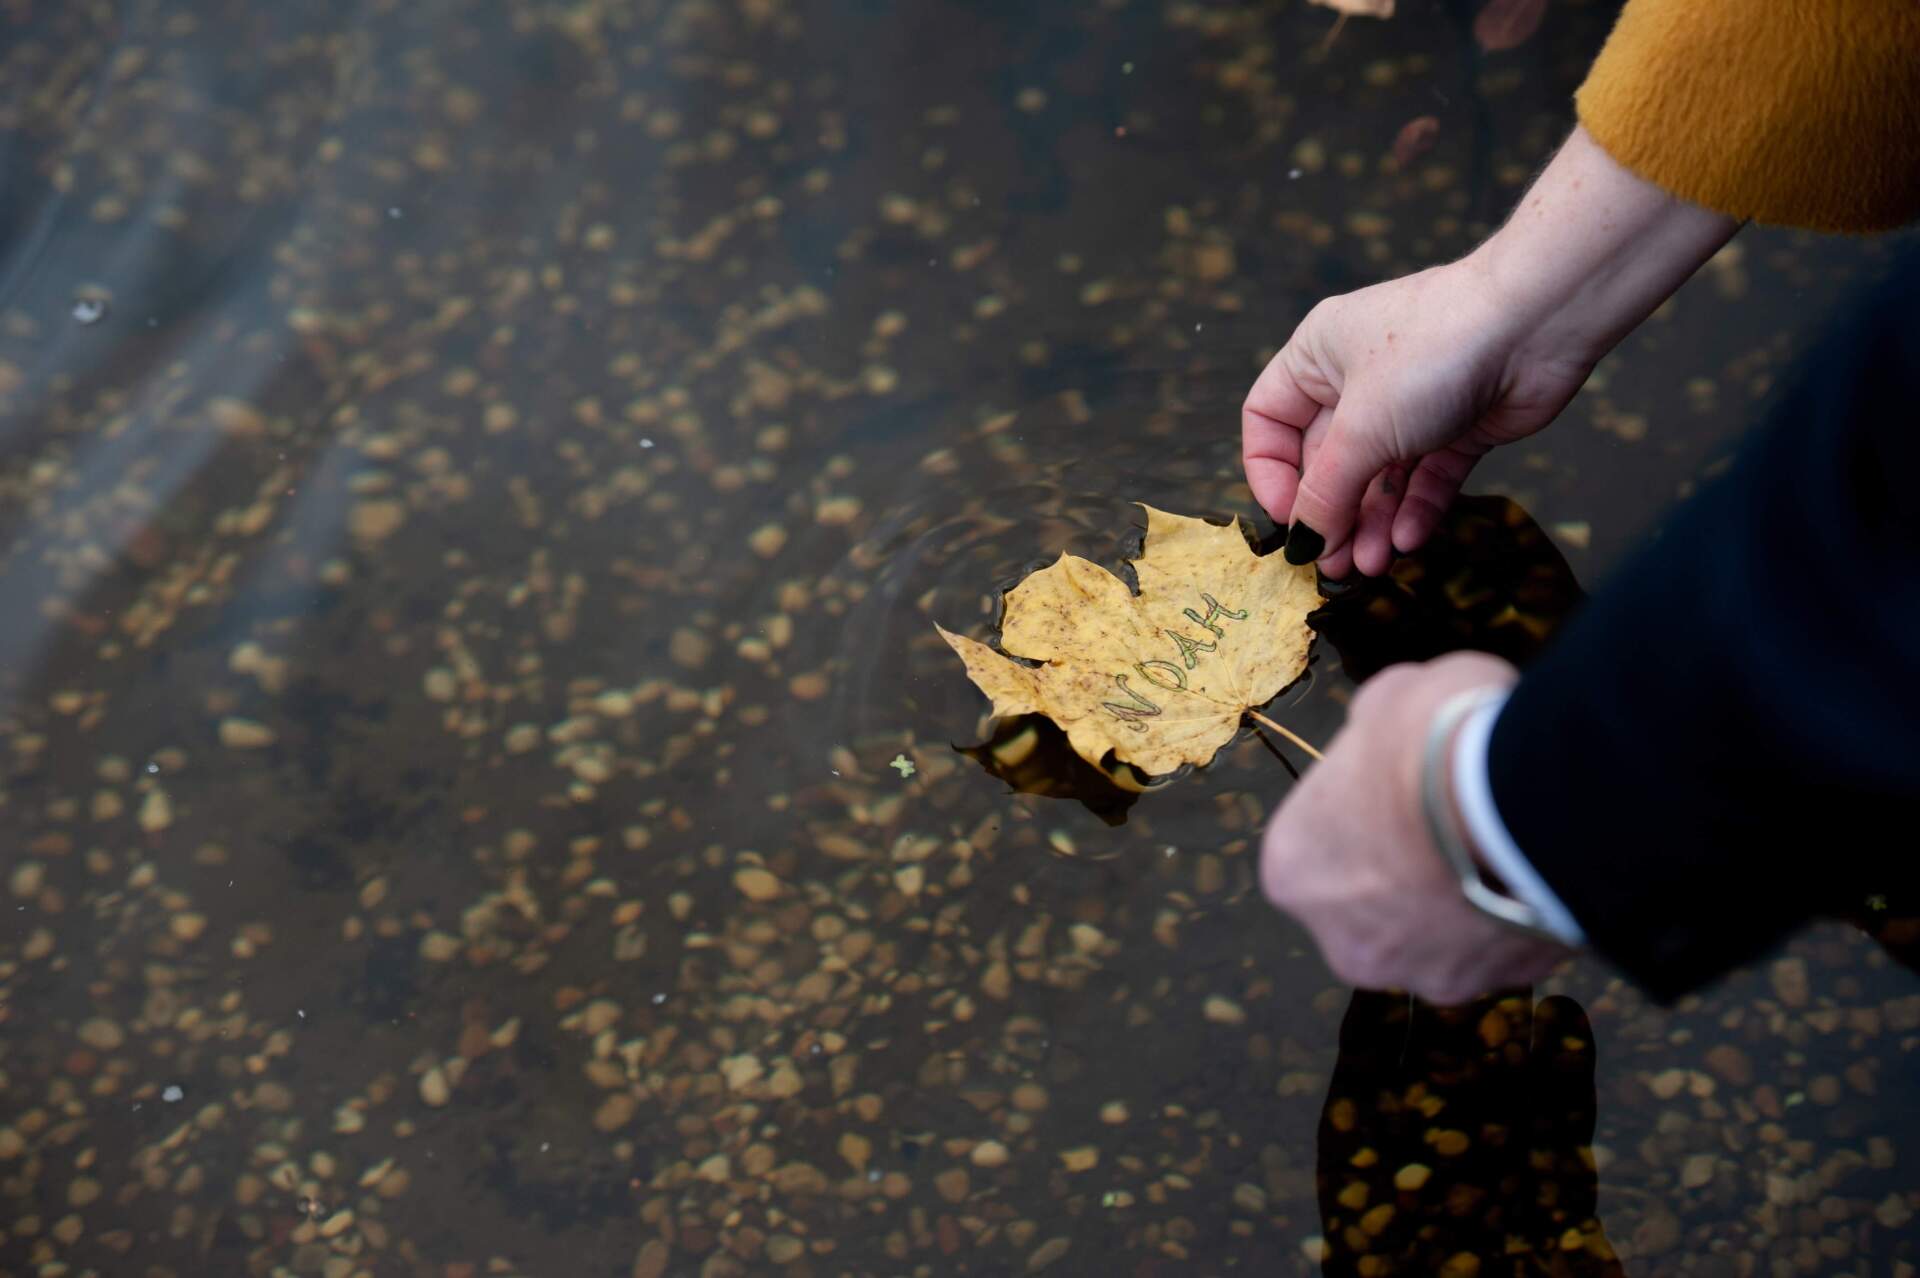 Man and Woman Release a Leaf into Water at Funeral Ceremony